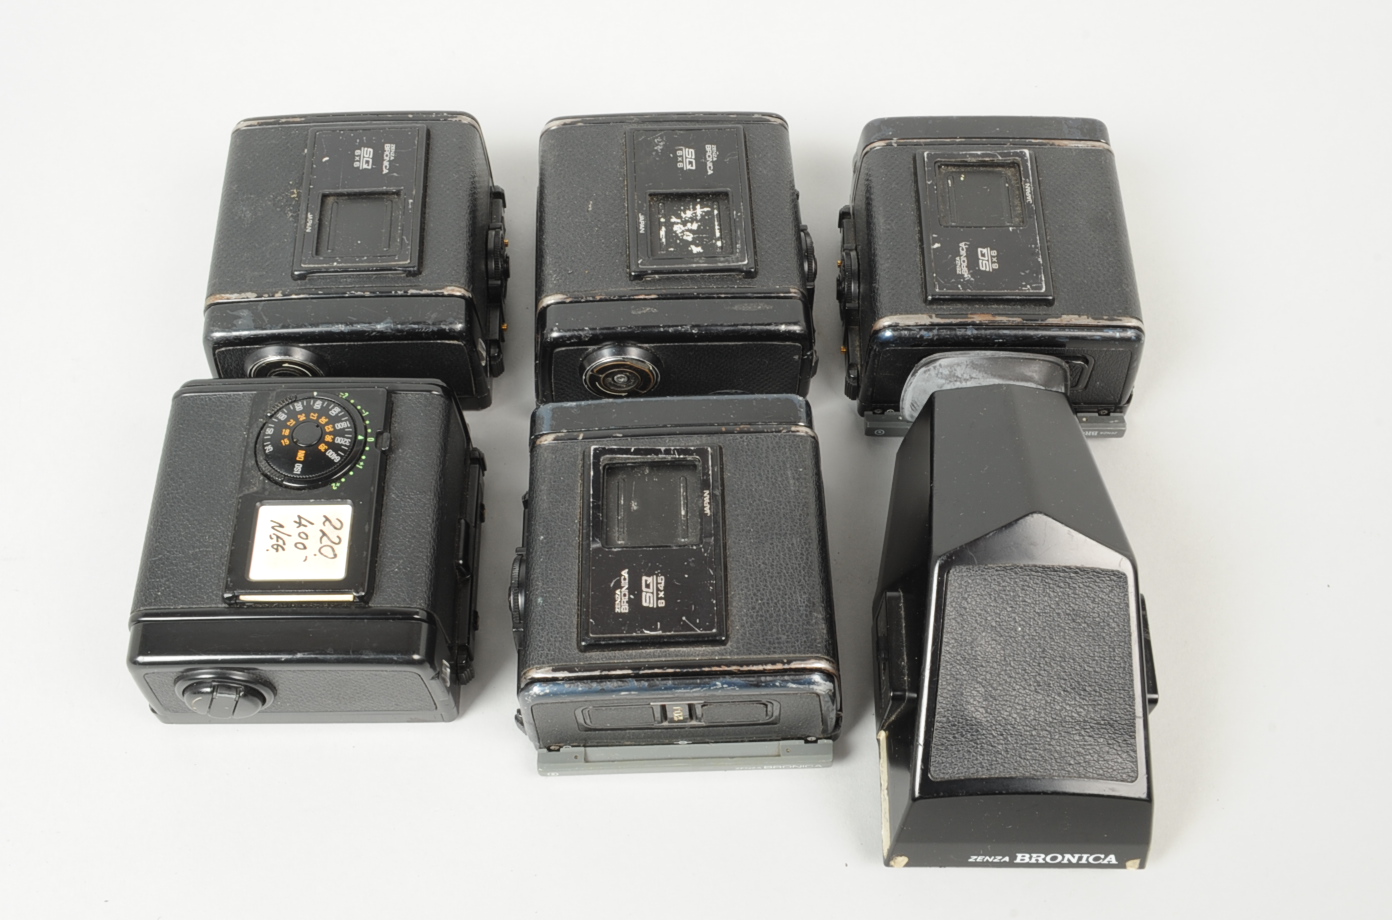 A Zenza Bronica SQ Ai Camera Outfit, serial no 1510746, untested, body F, scratches to all sides, - Image 6 of 6